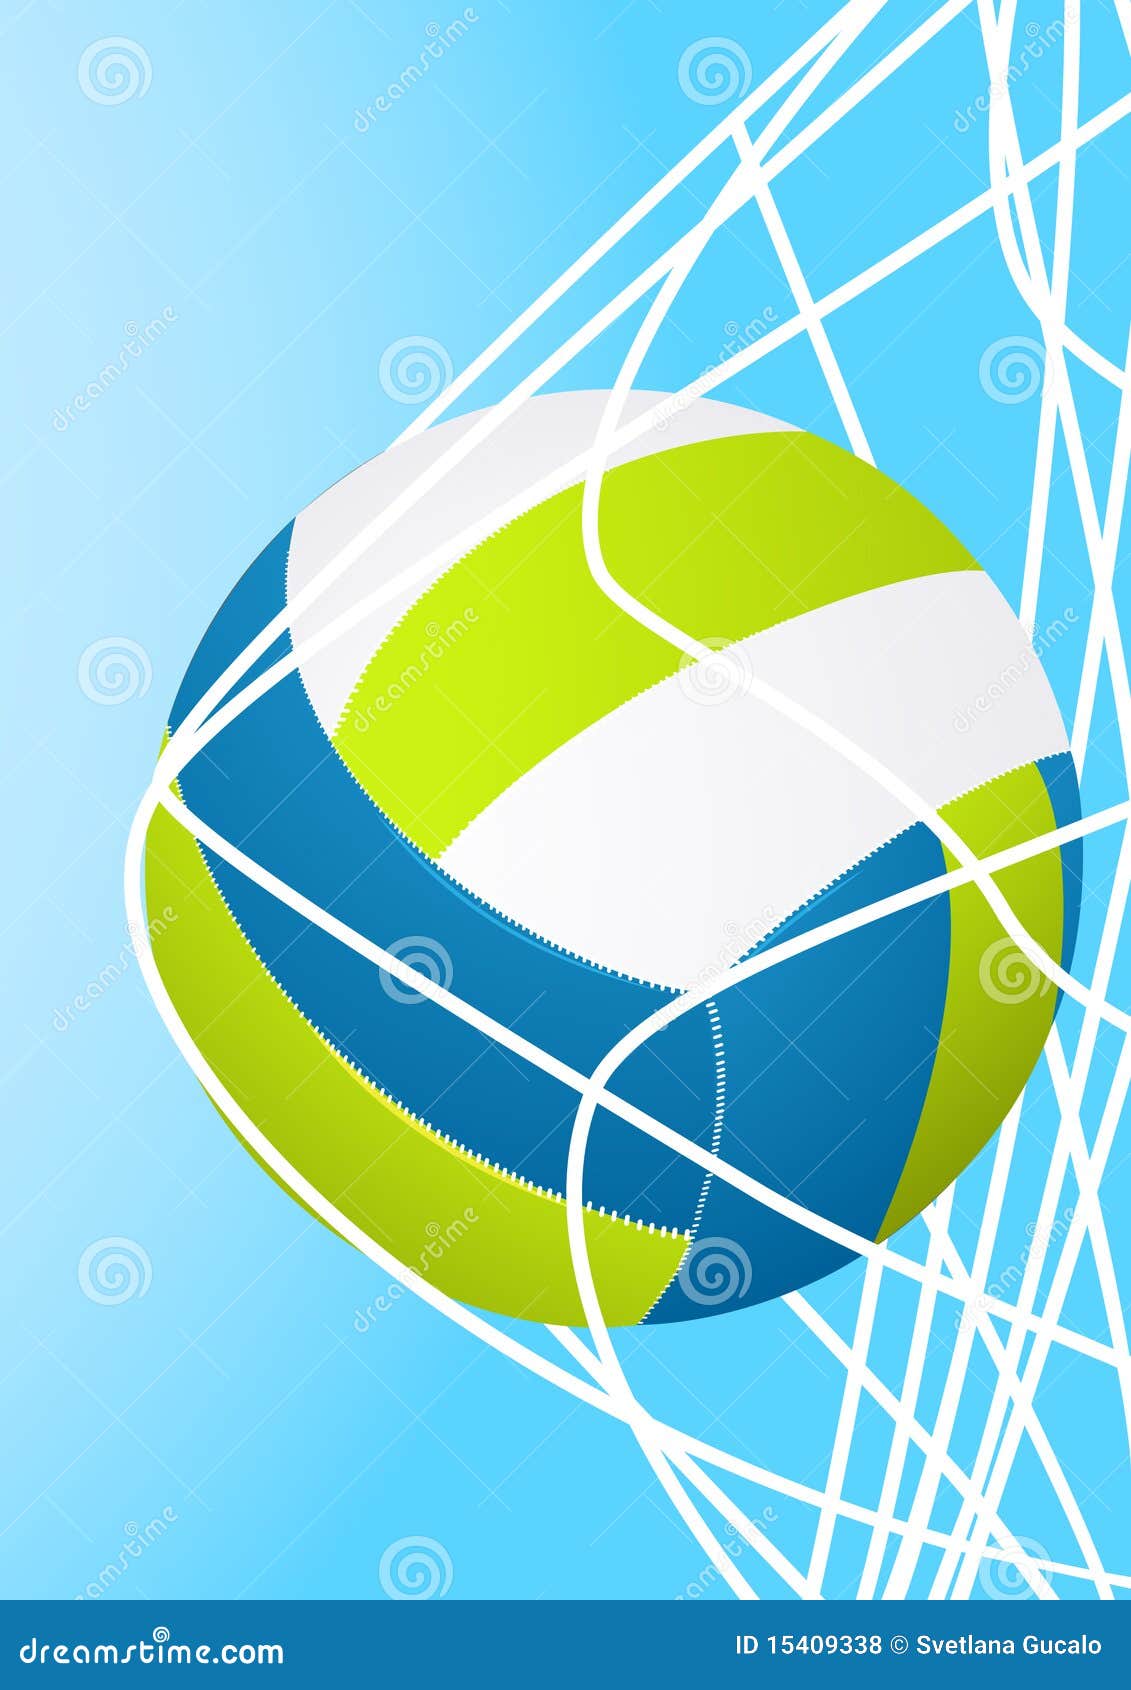 Valleyball stock vector. Illustration of competition - 15409338